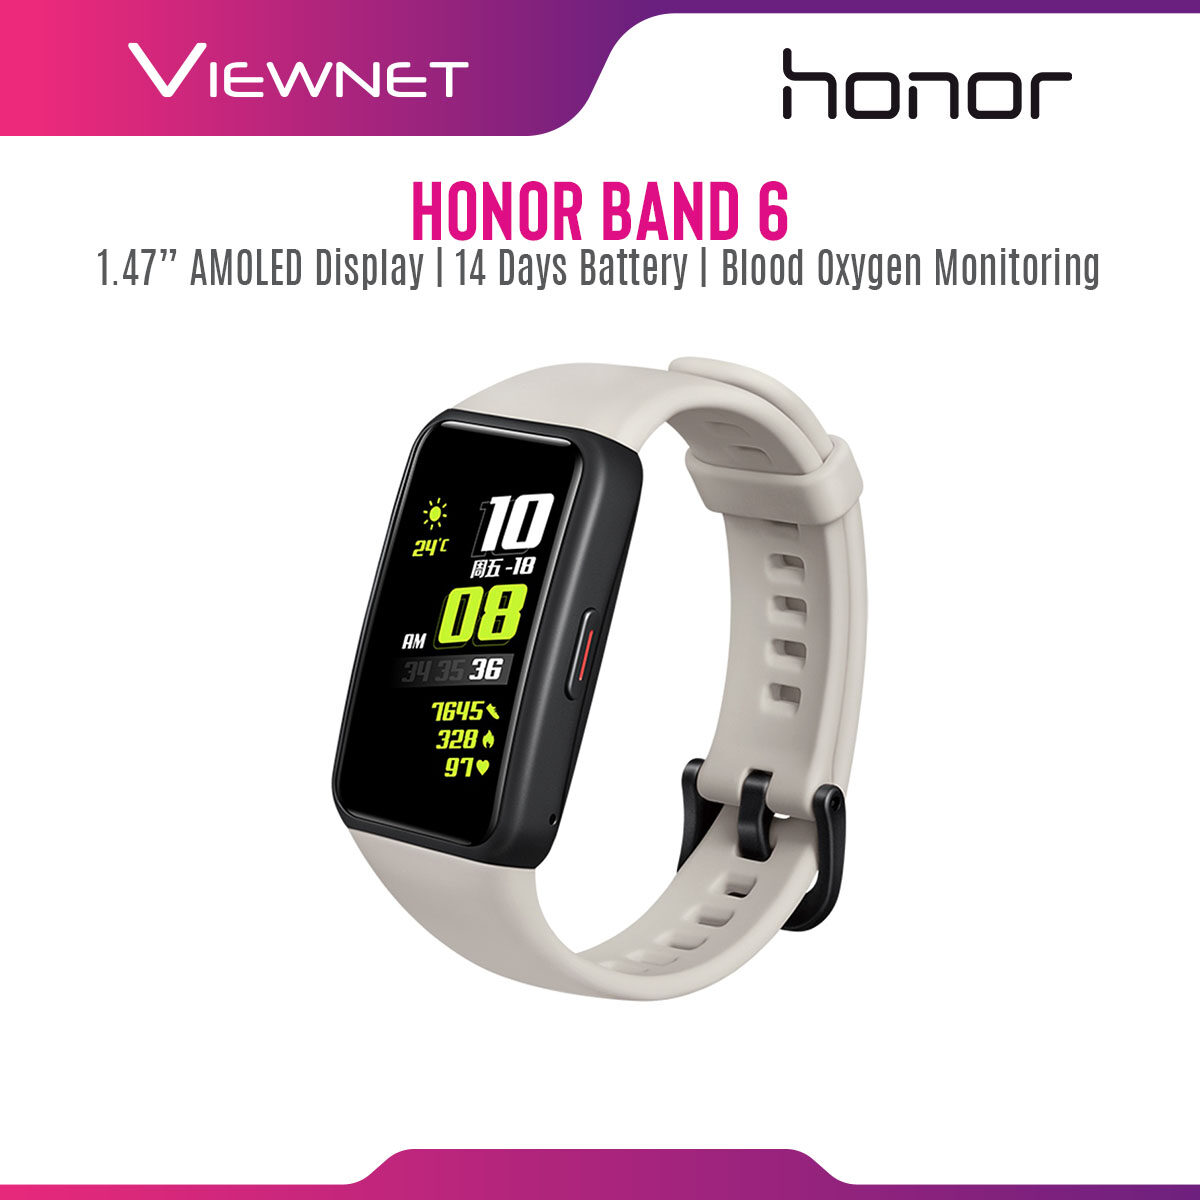 Honor Band 6 Smart Wristband with 1.47